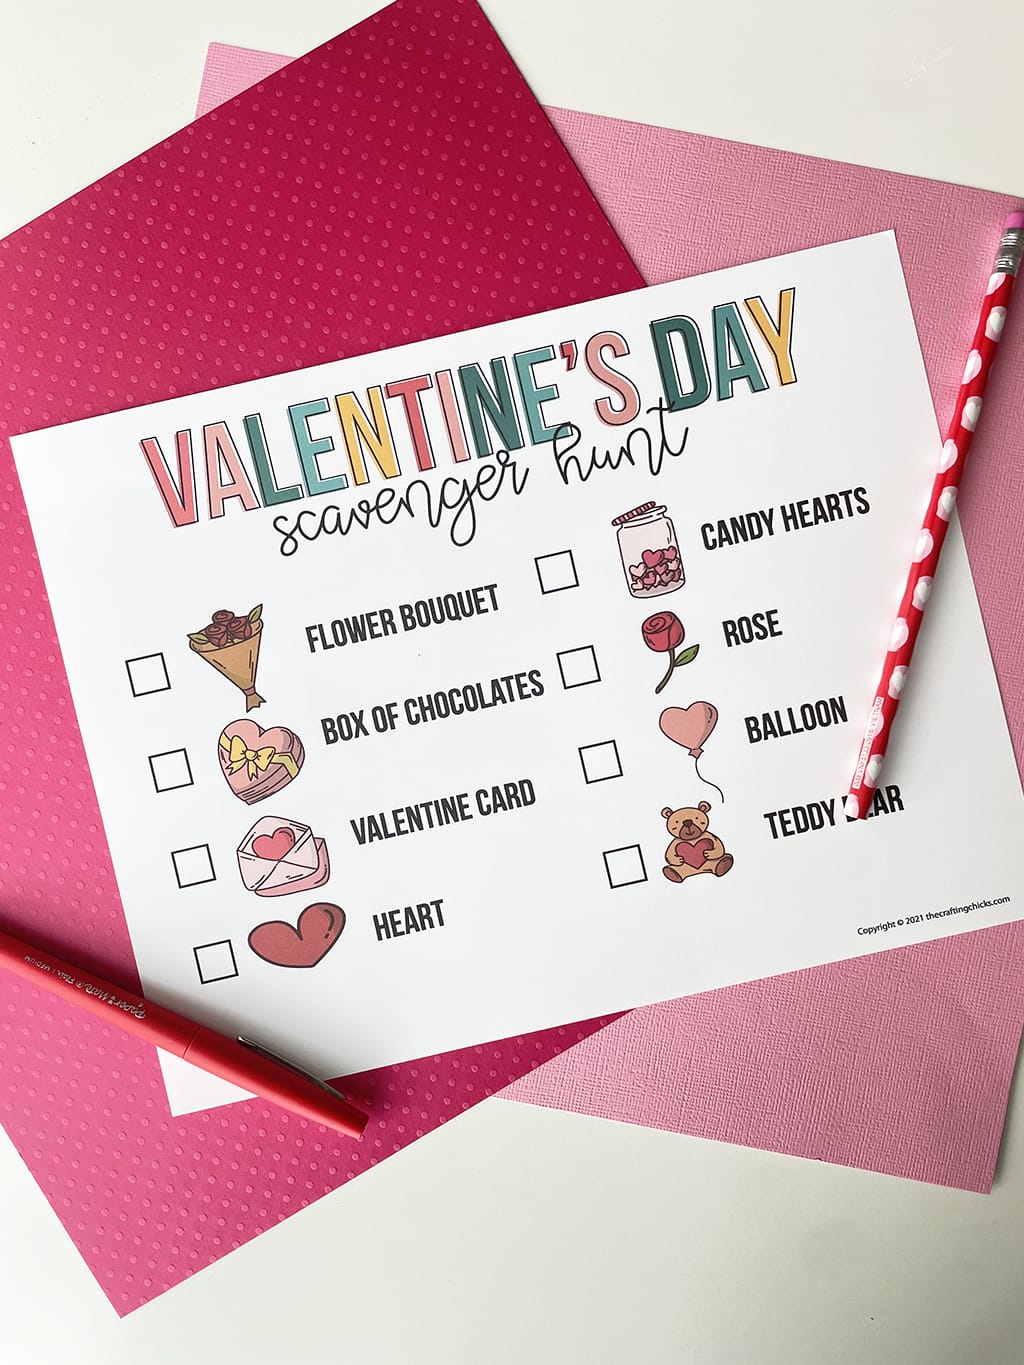 Printable of the Valentine's Day Scavenger Hunt printed out and placed on a white table, with dark pink and light pink paper behind it. Red fine line marker is on the left side and a valentine pencil is on the right side.